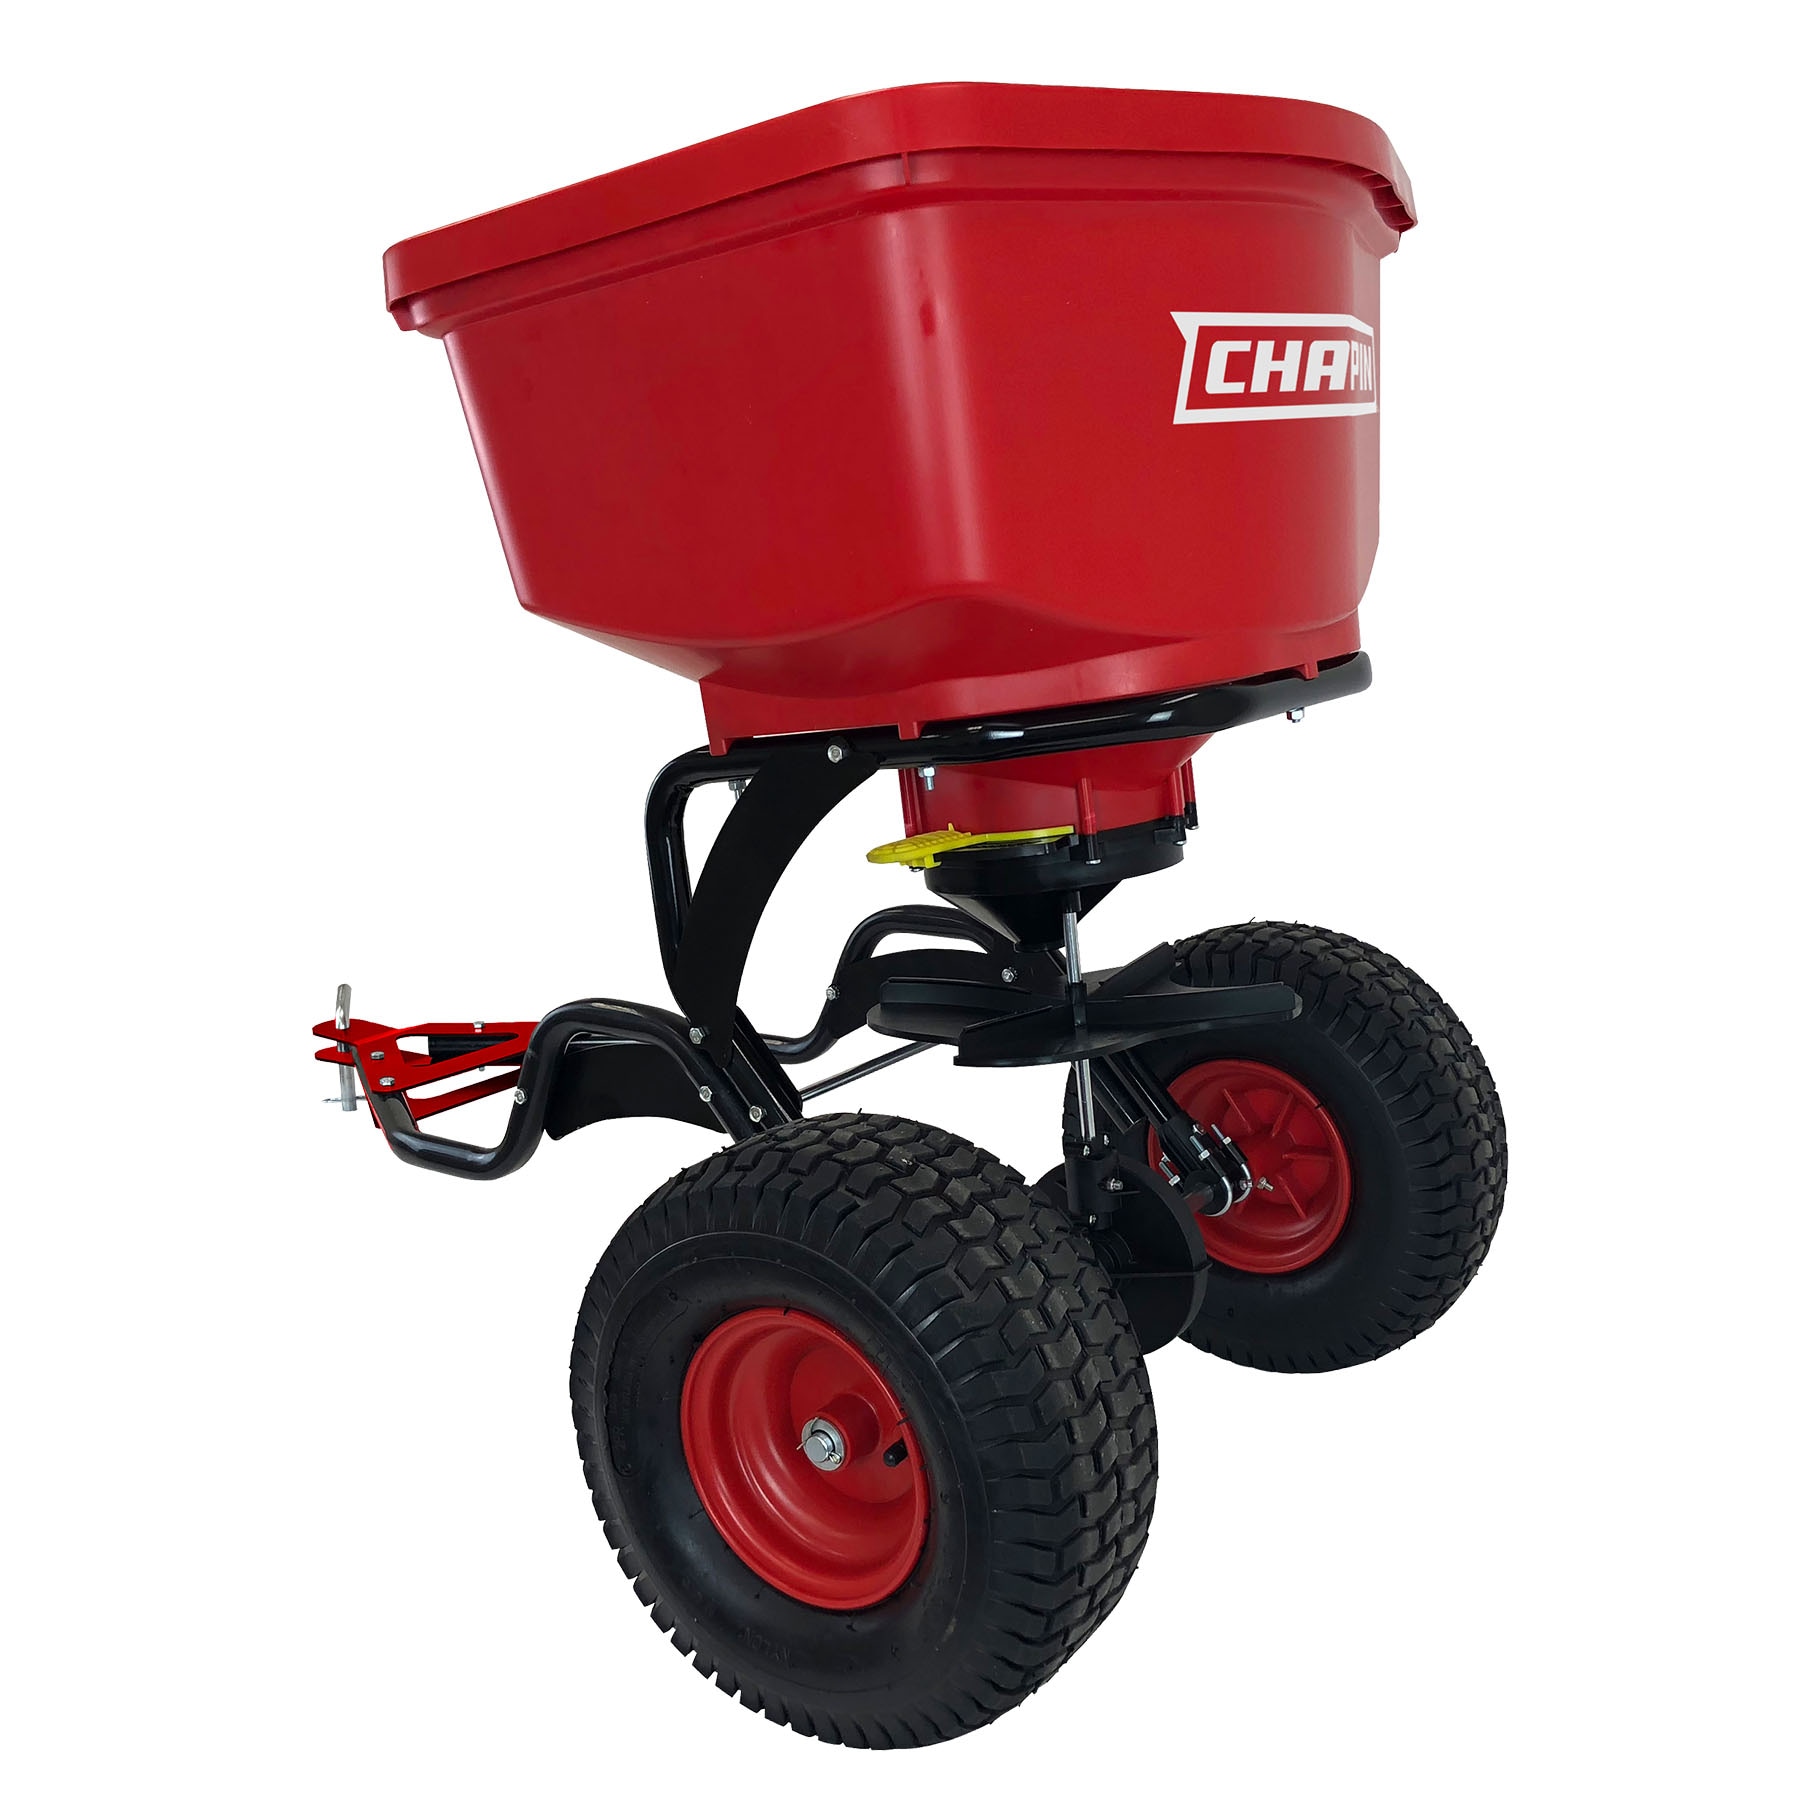 Chapin 150 lb. Auto-Stop Tow Behind Spreader 8620B